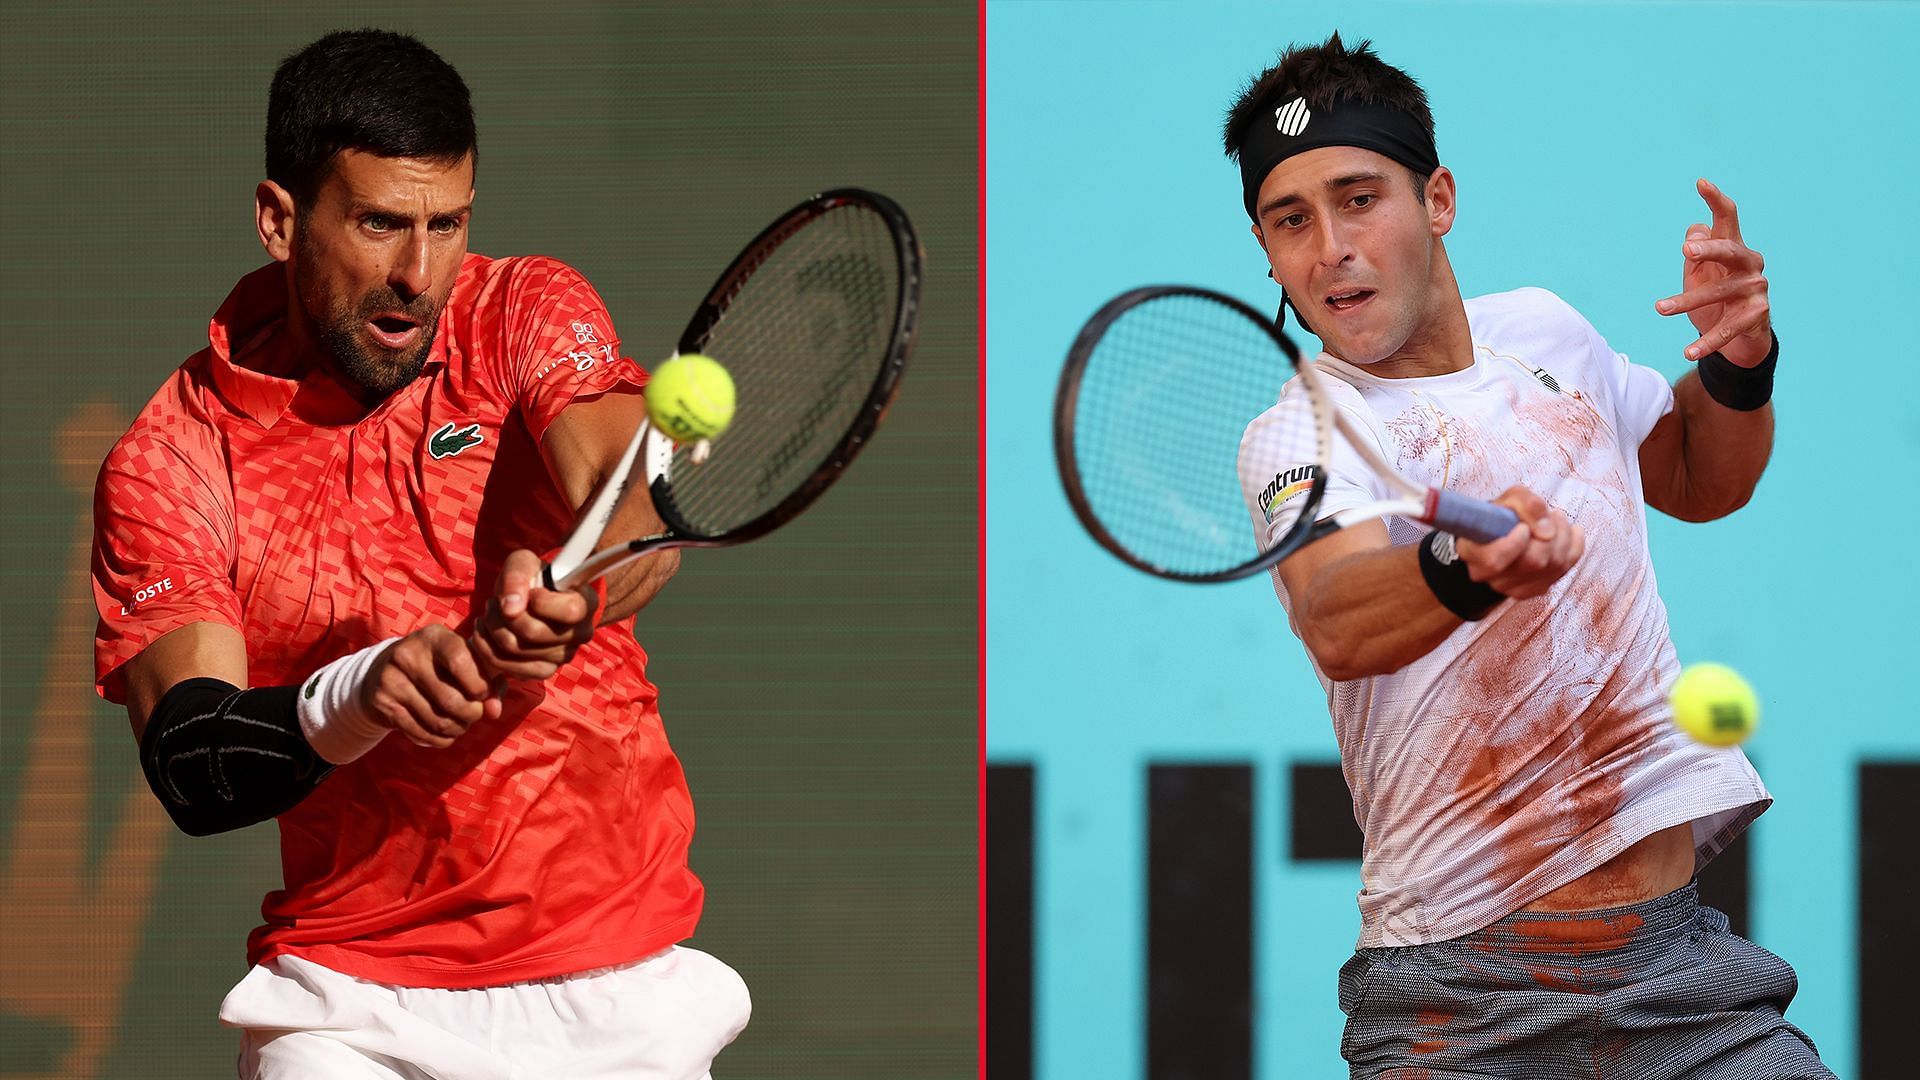 Novak Djokovic and Tomas Martin Etcheverry lead a bunch of exciting second round matches at the Italian Open.